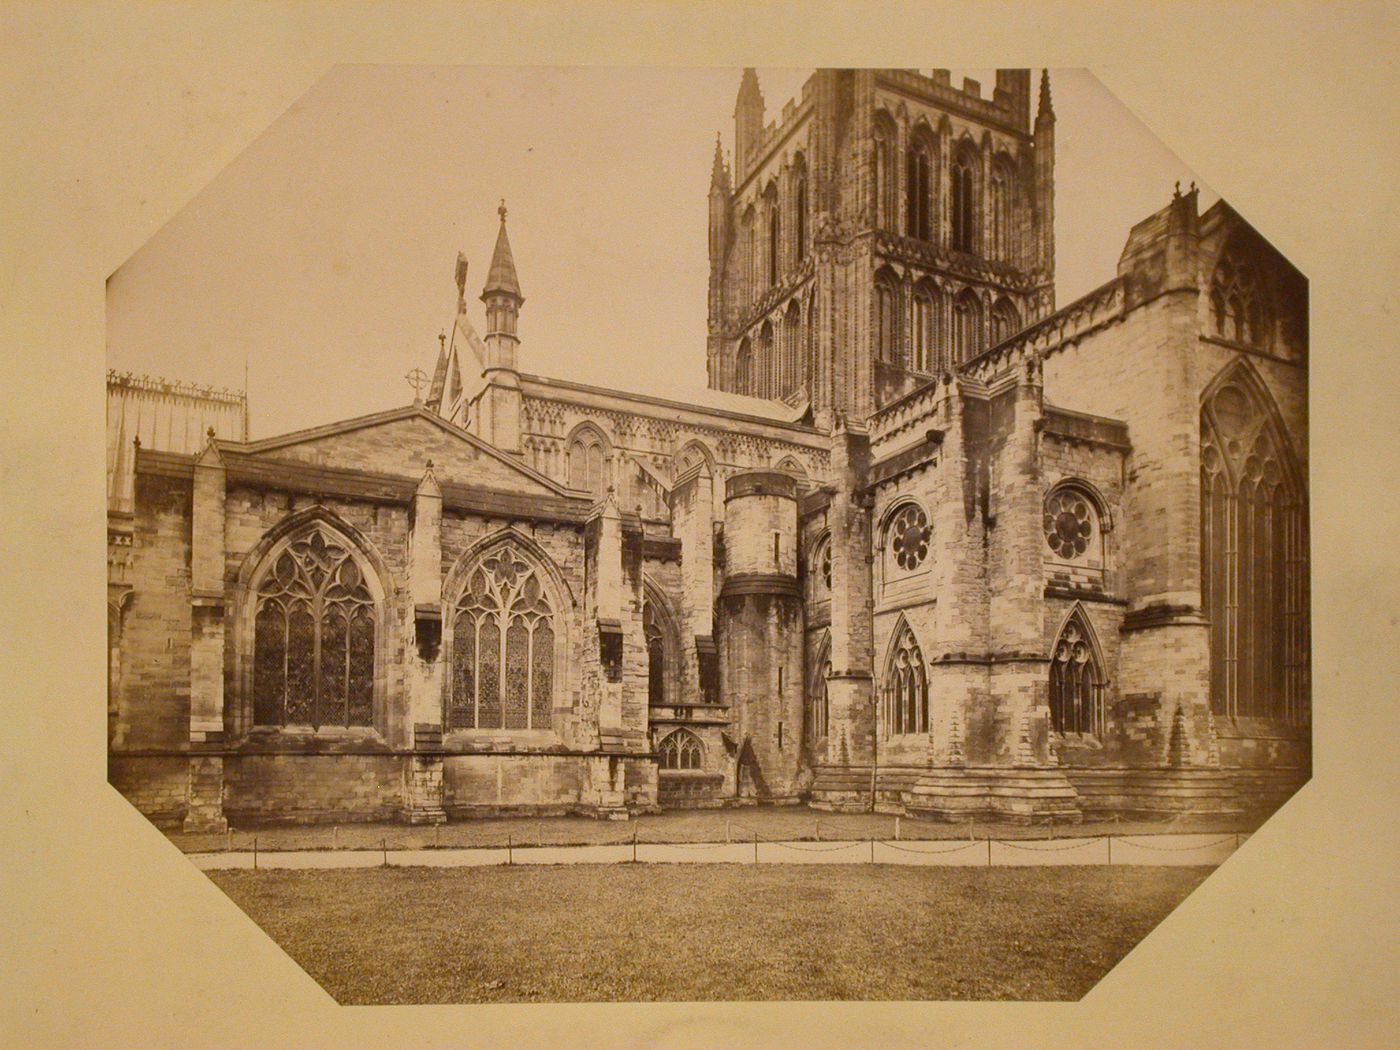 Partial view of Hereford Cathedral showing the choir and a transept, Hereford, England